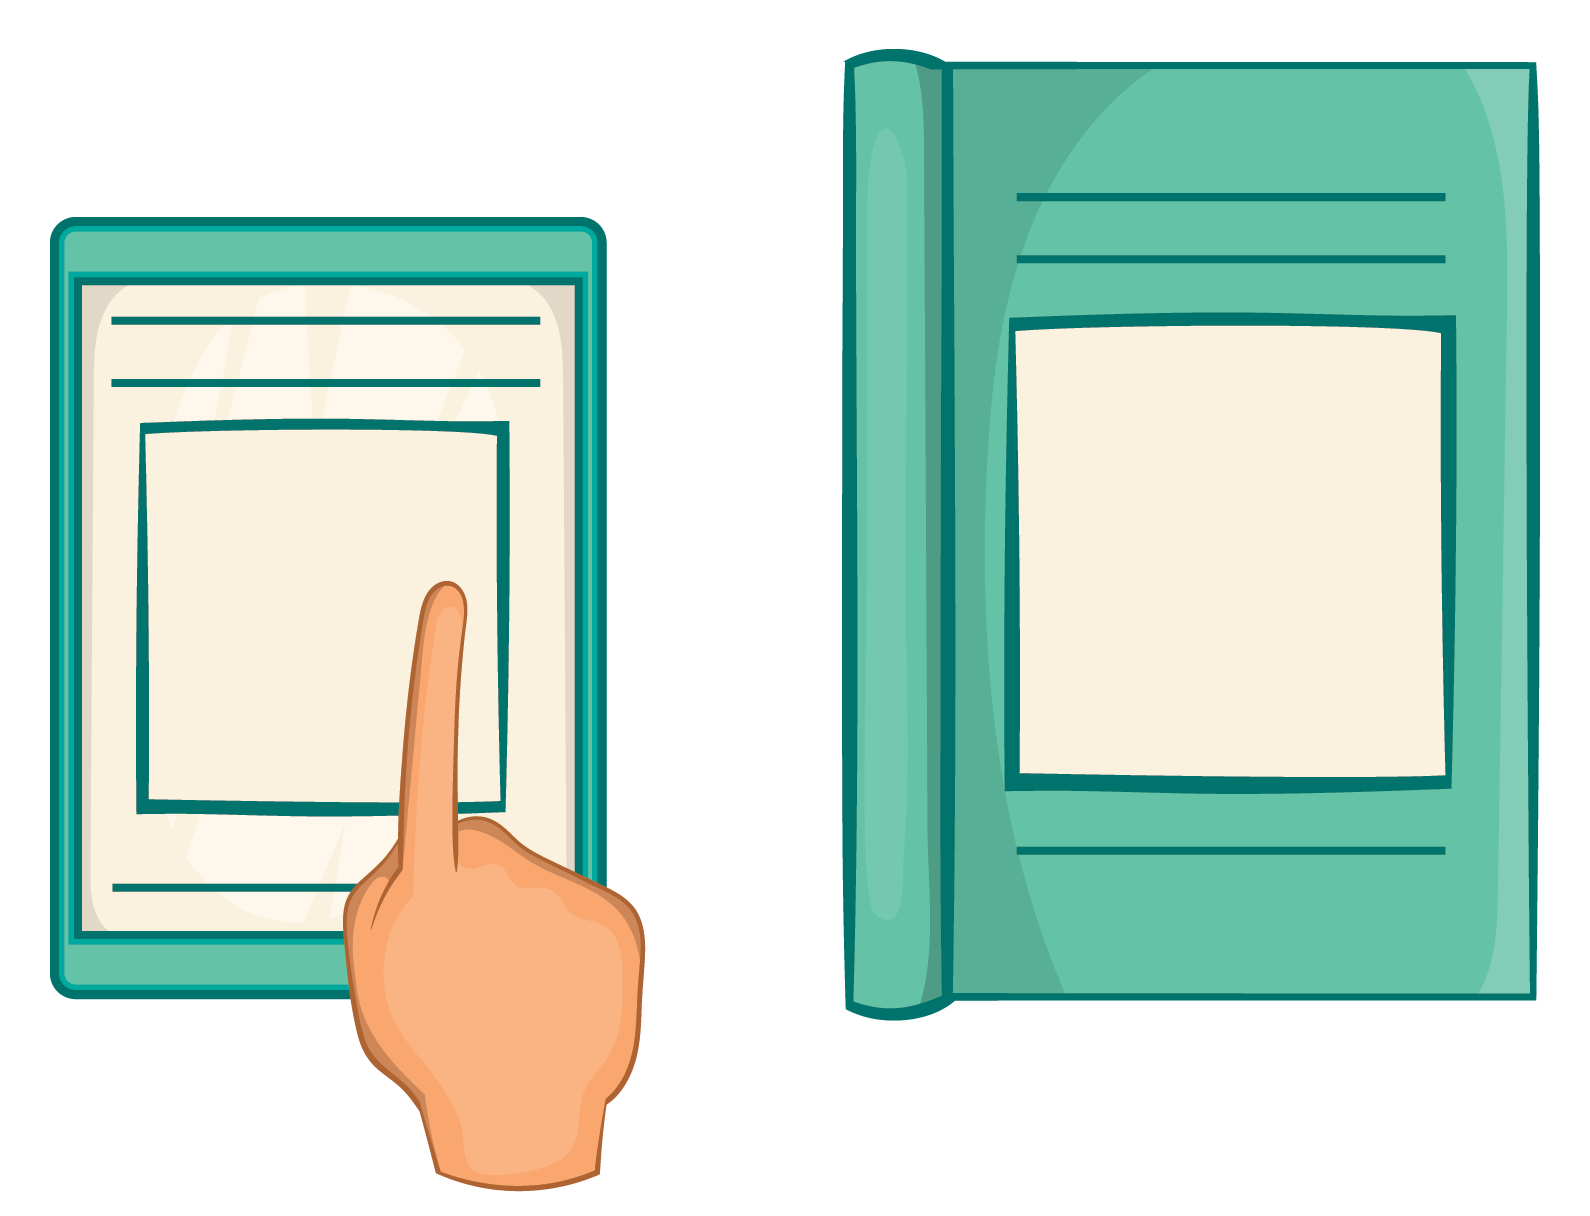 Ereader & Print cover icons